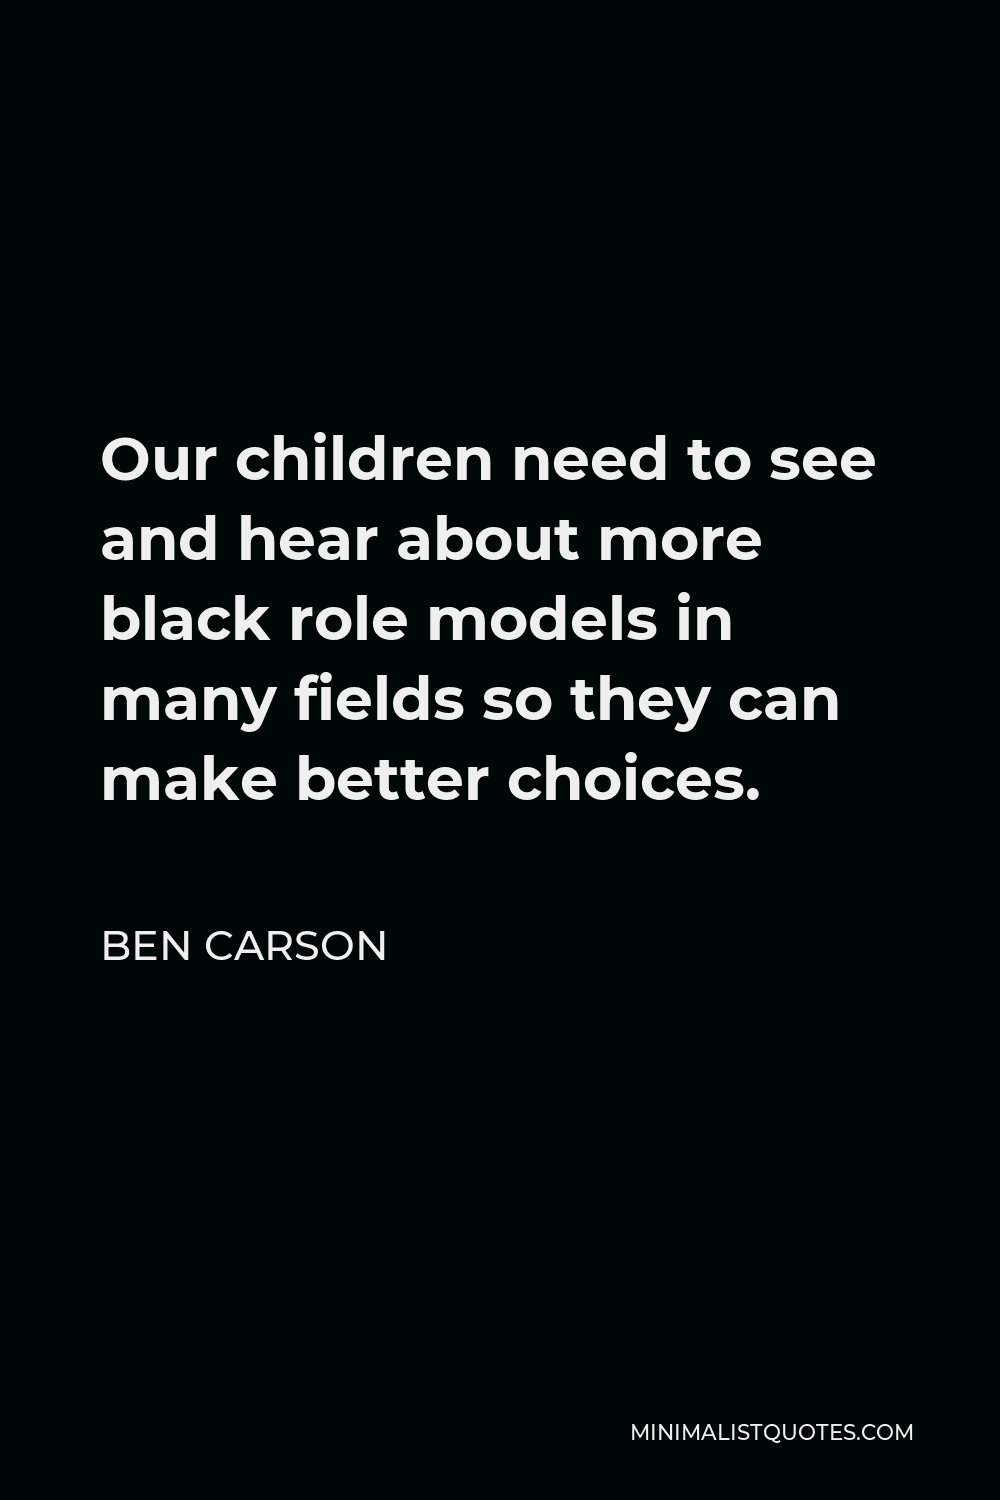 Benjamin Carson Quote - Our children need to see and hear about more black role models in many fields so they can make better choices.